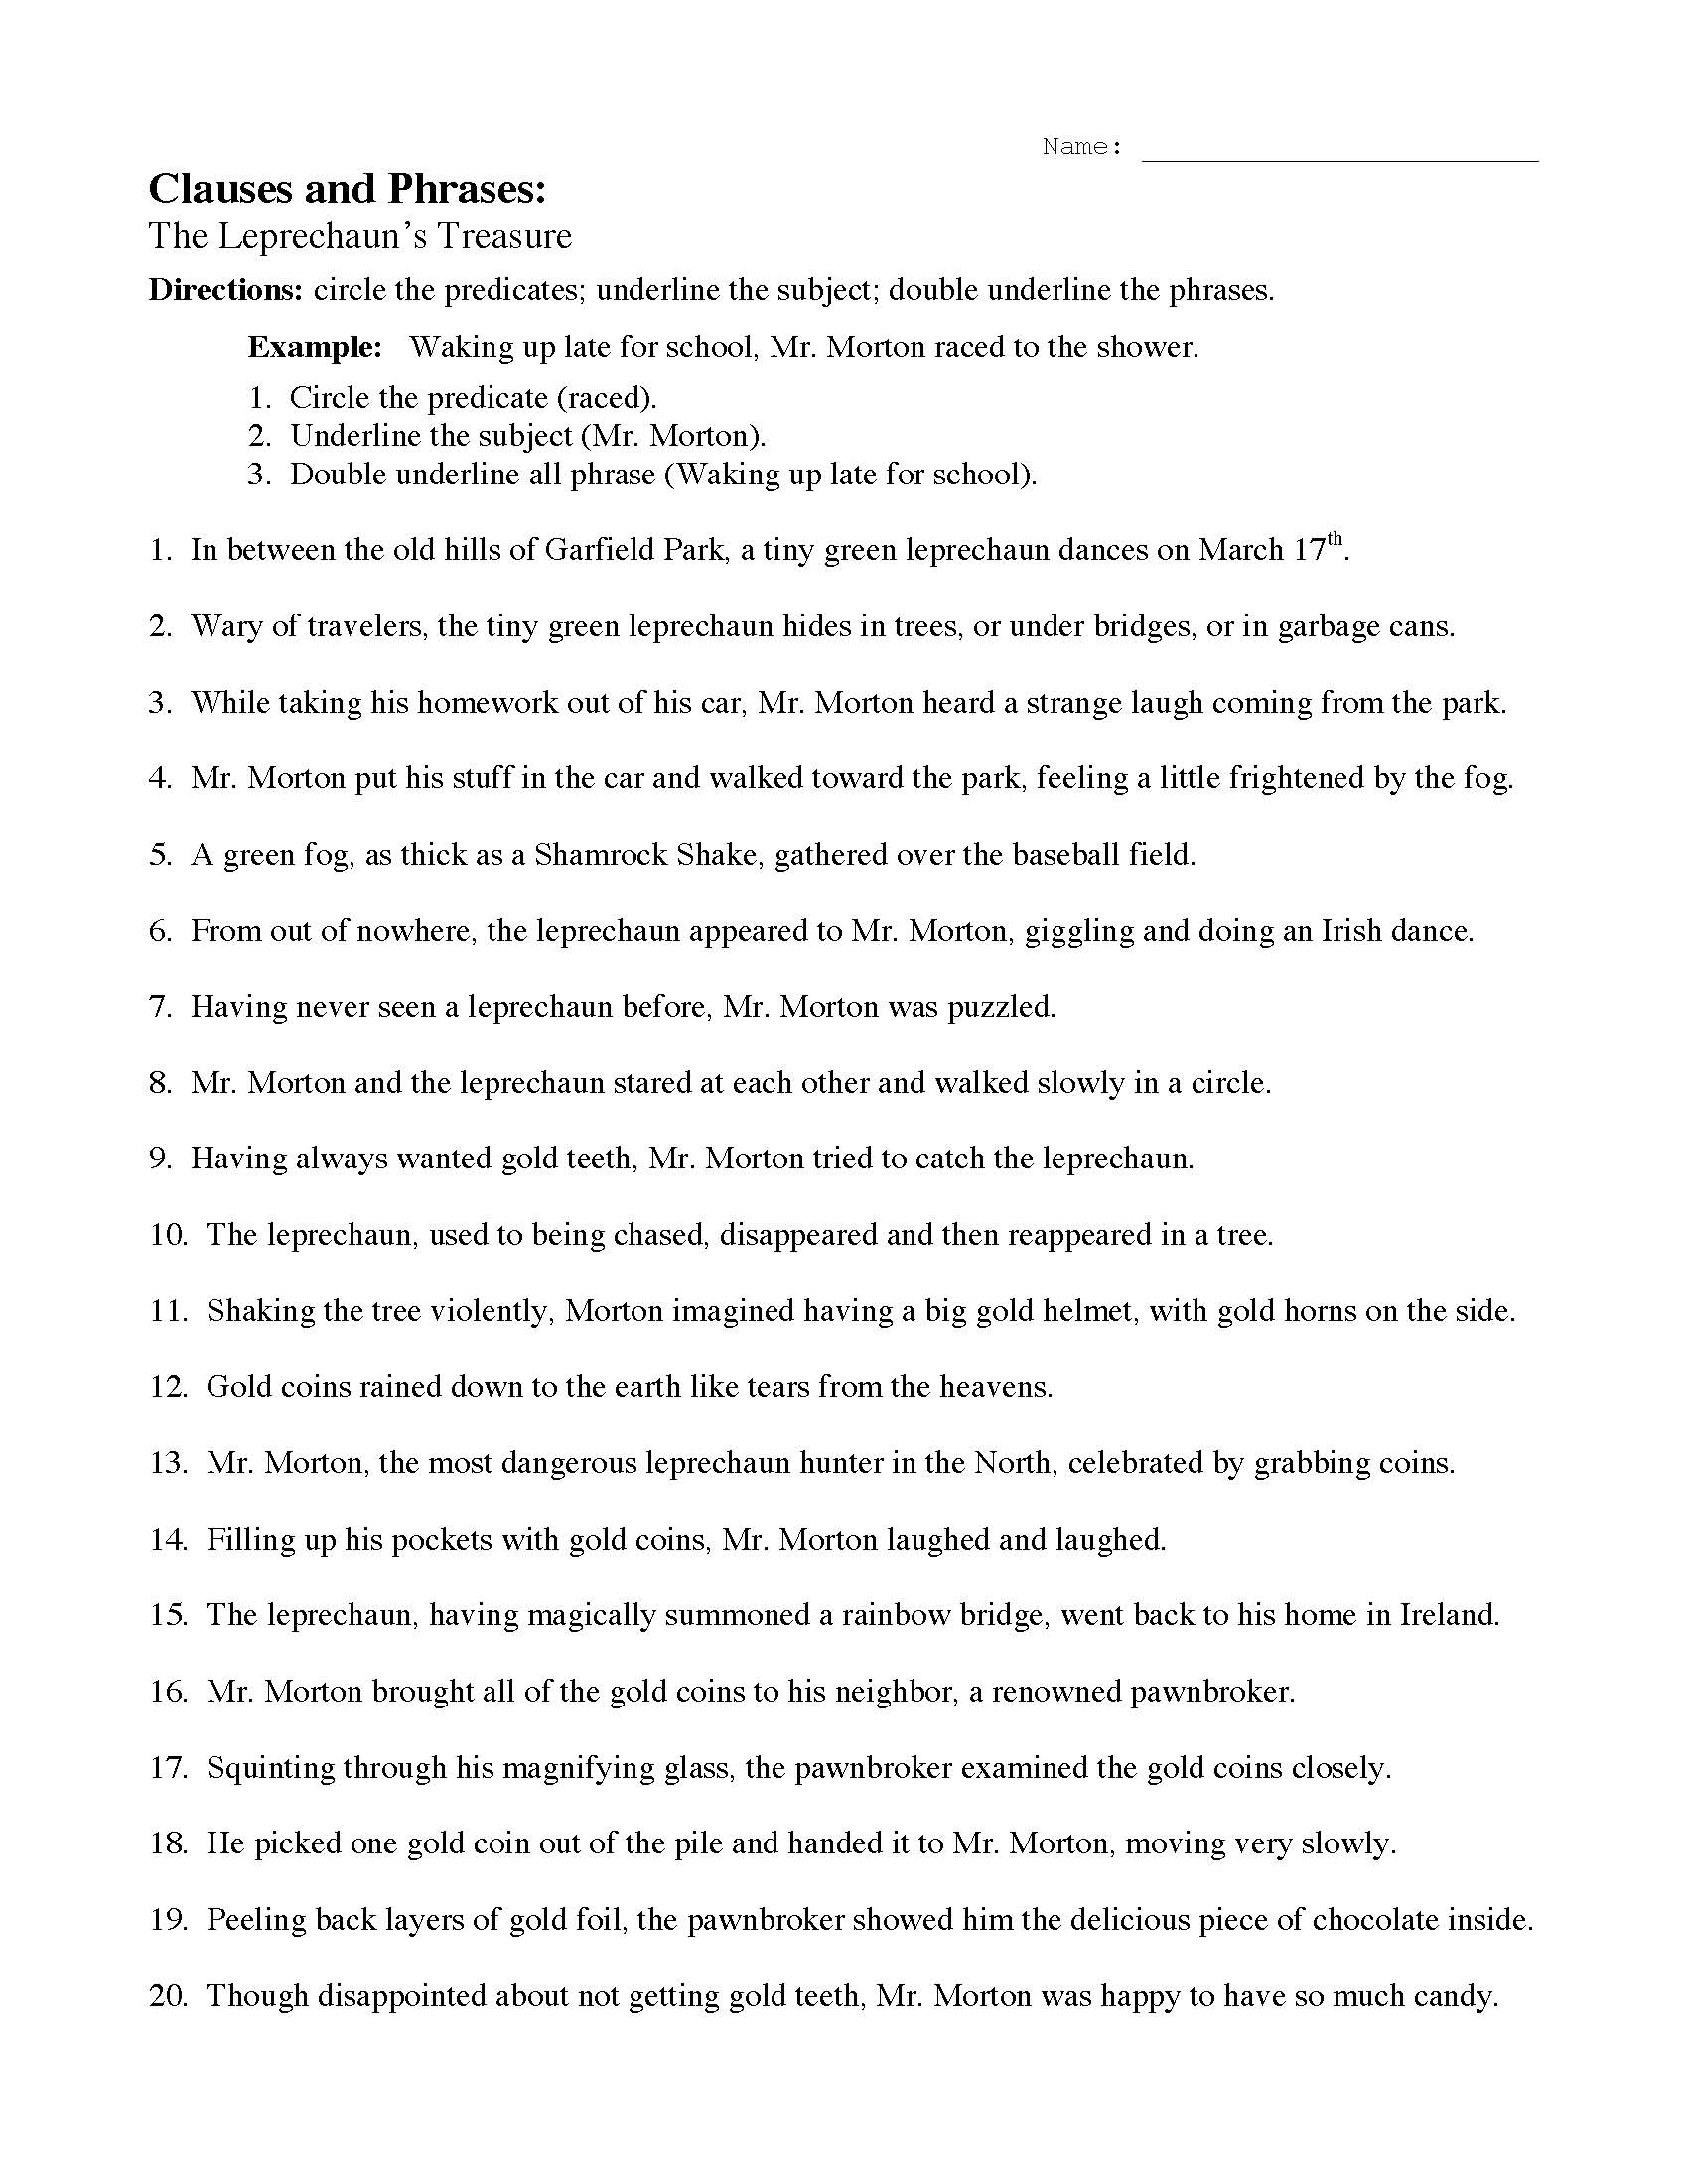 clauses-and-phrases-with-leprechauns-worksheet-sentence-structure